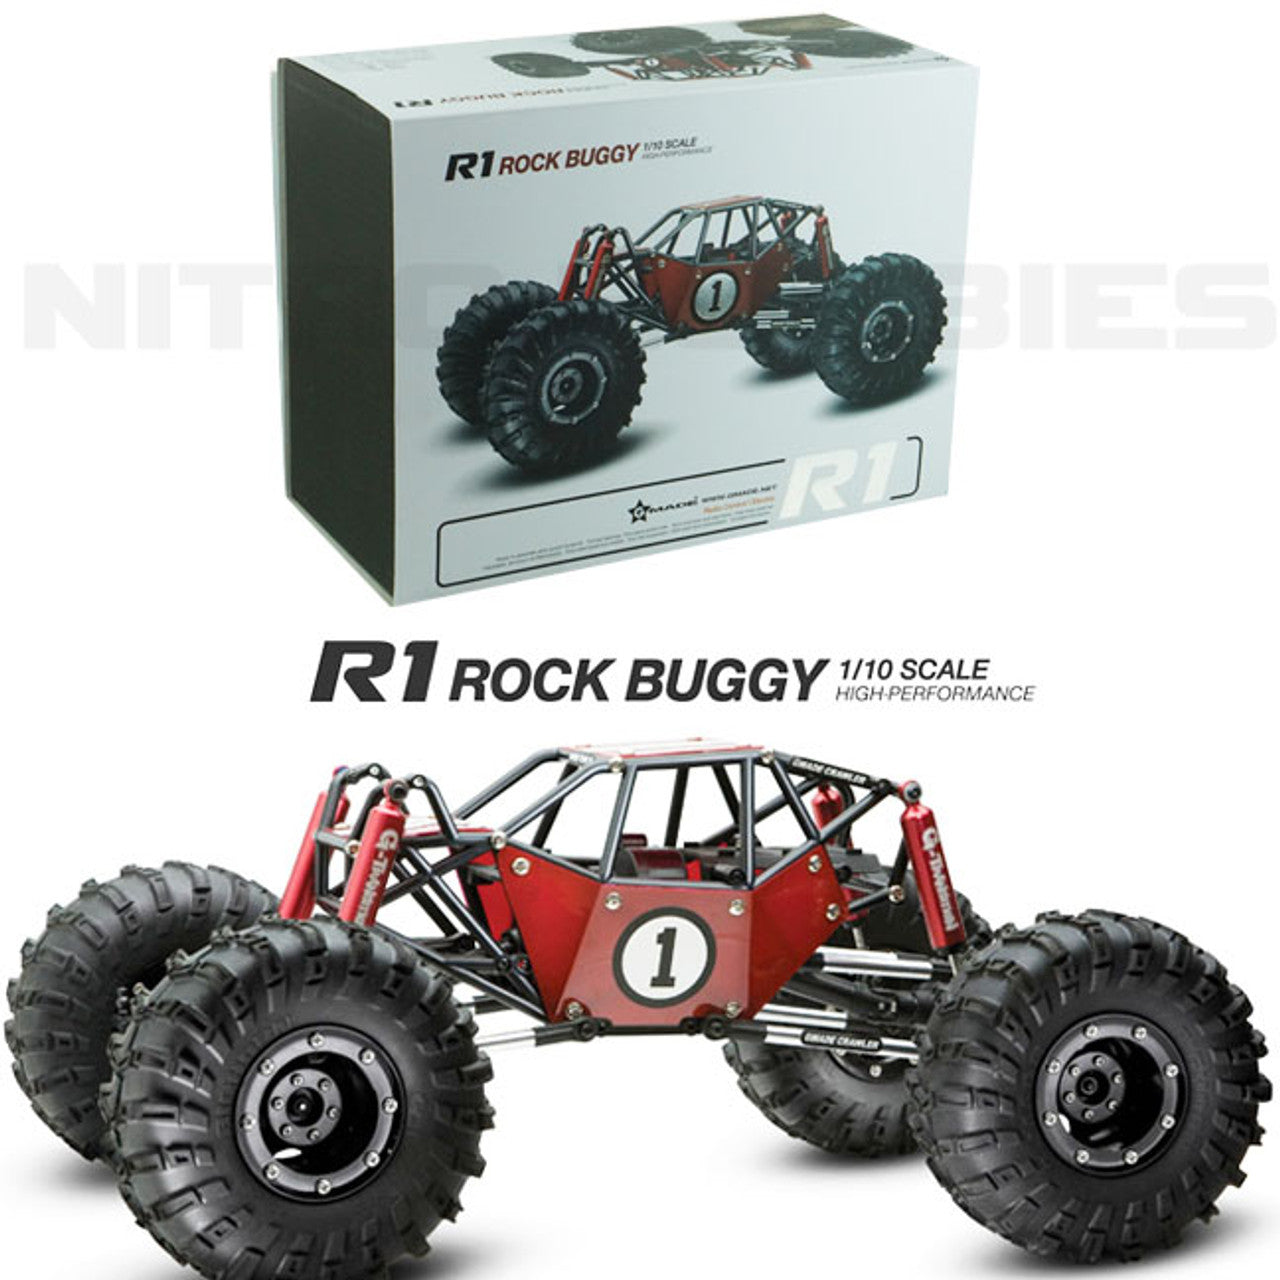 Gmade R1 Rock Crawler Buggy Kit 1/10 Scale  a Tube Frame and 4WD